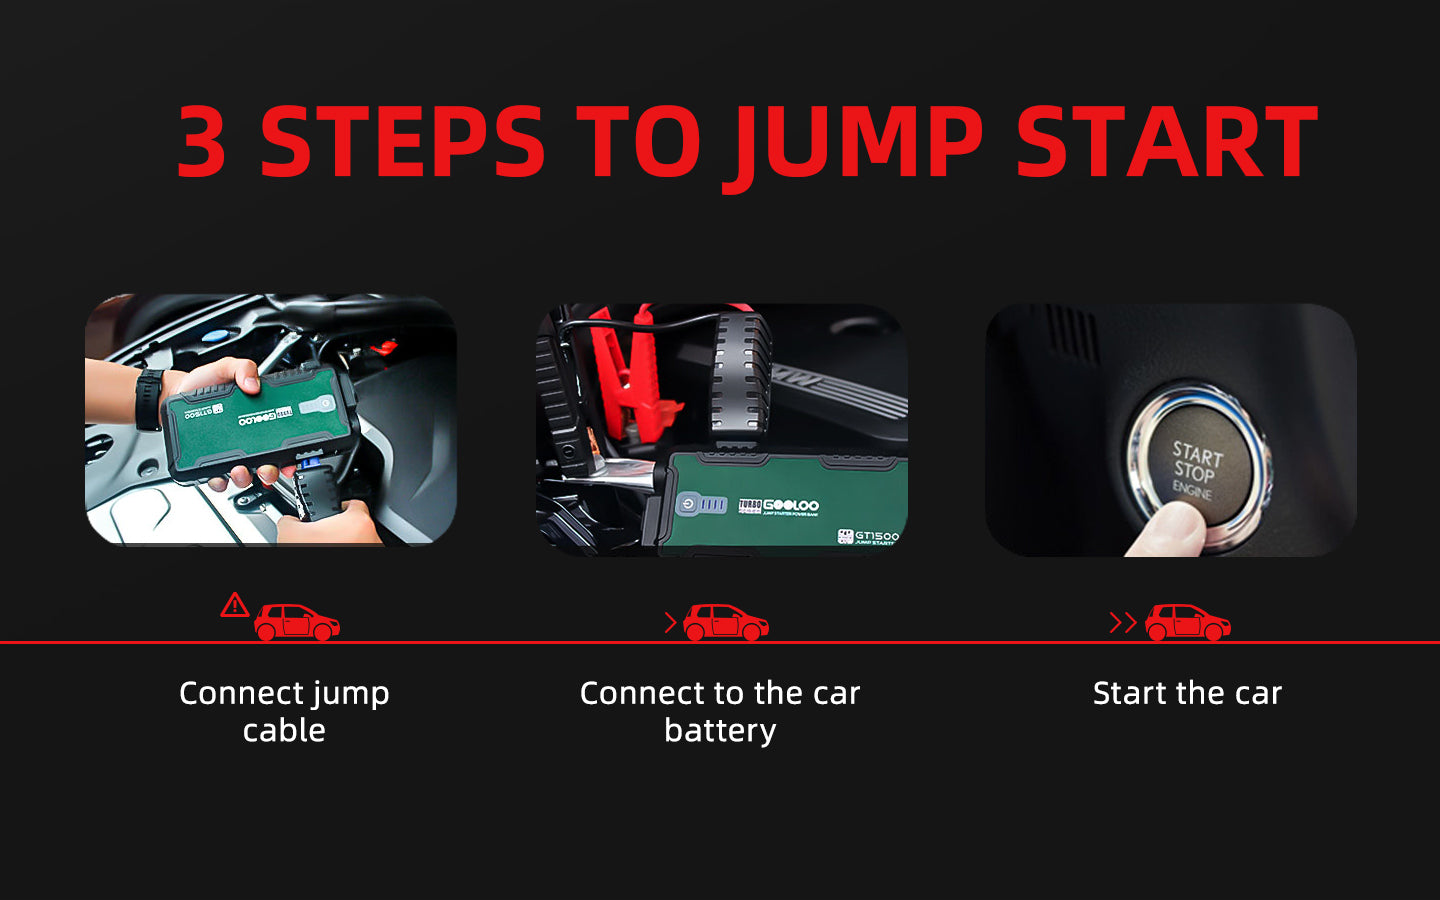 3 steps to jump start your car